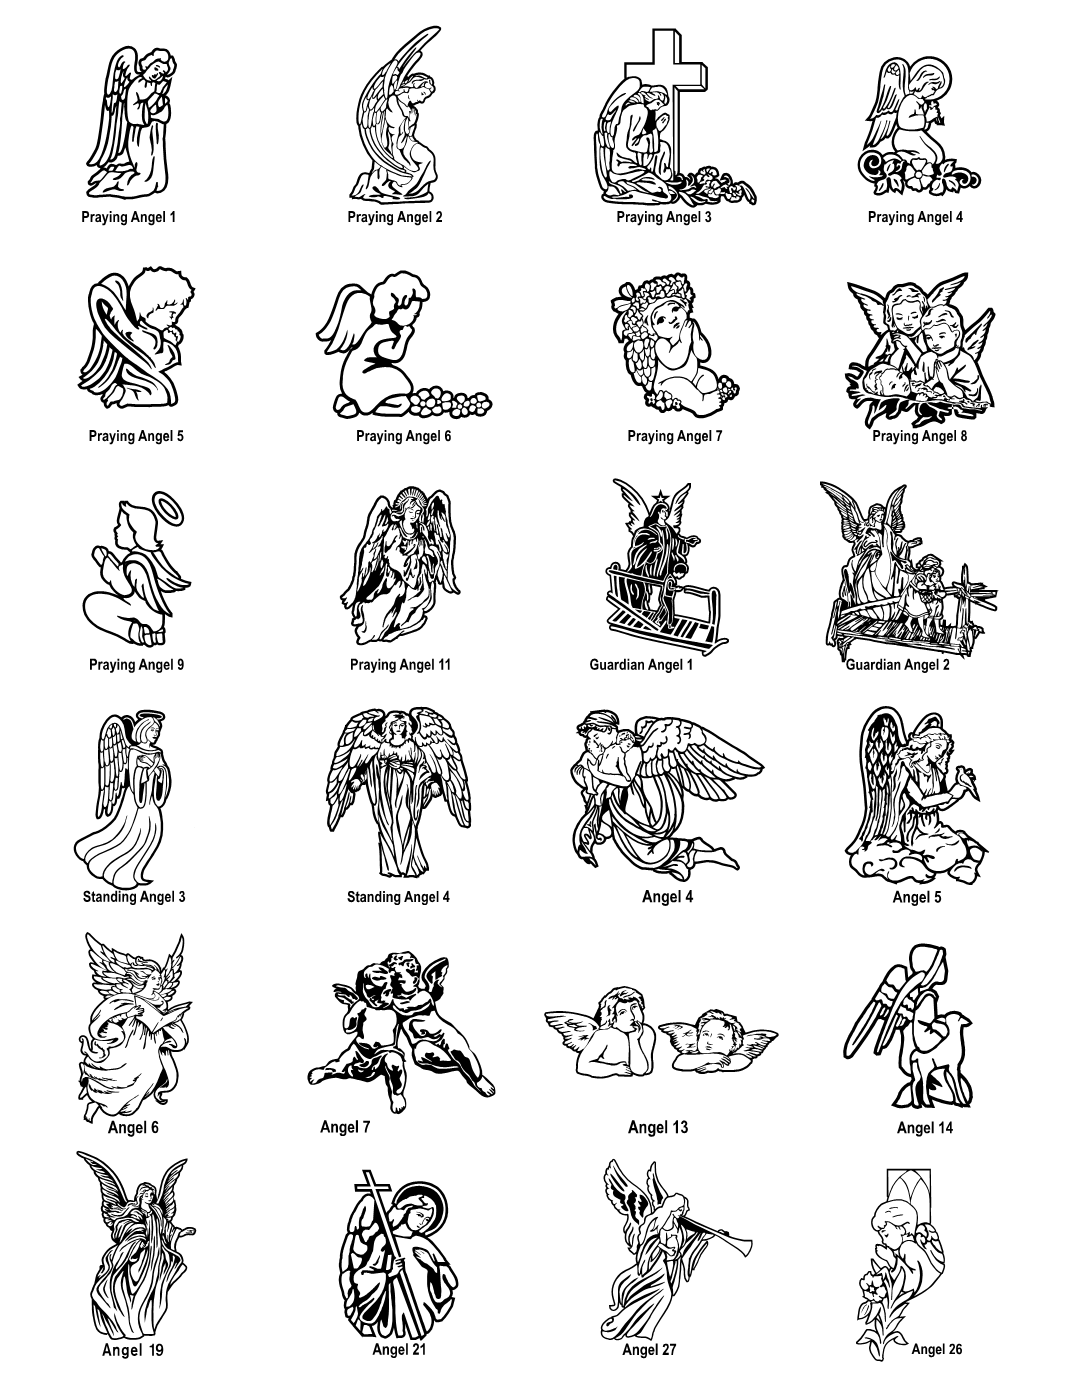 Grave markers clipart.